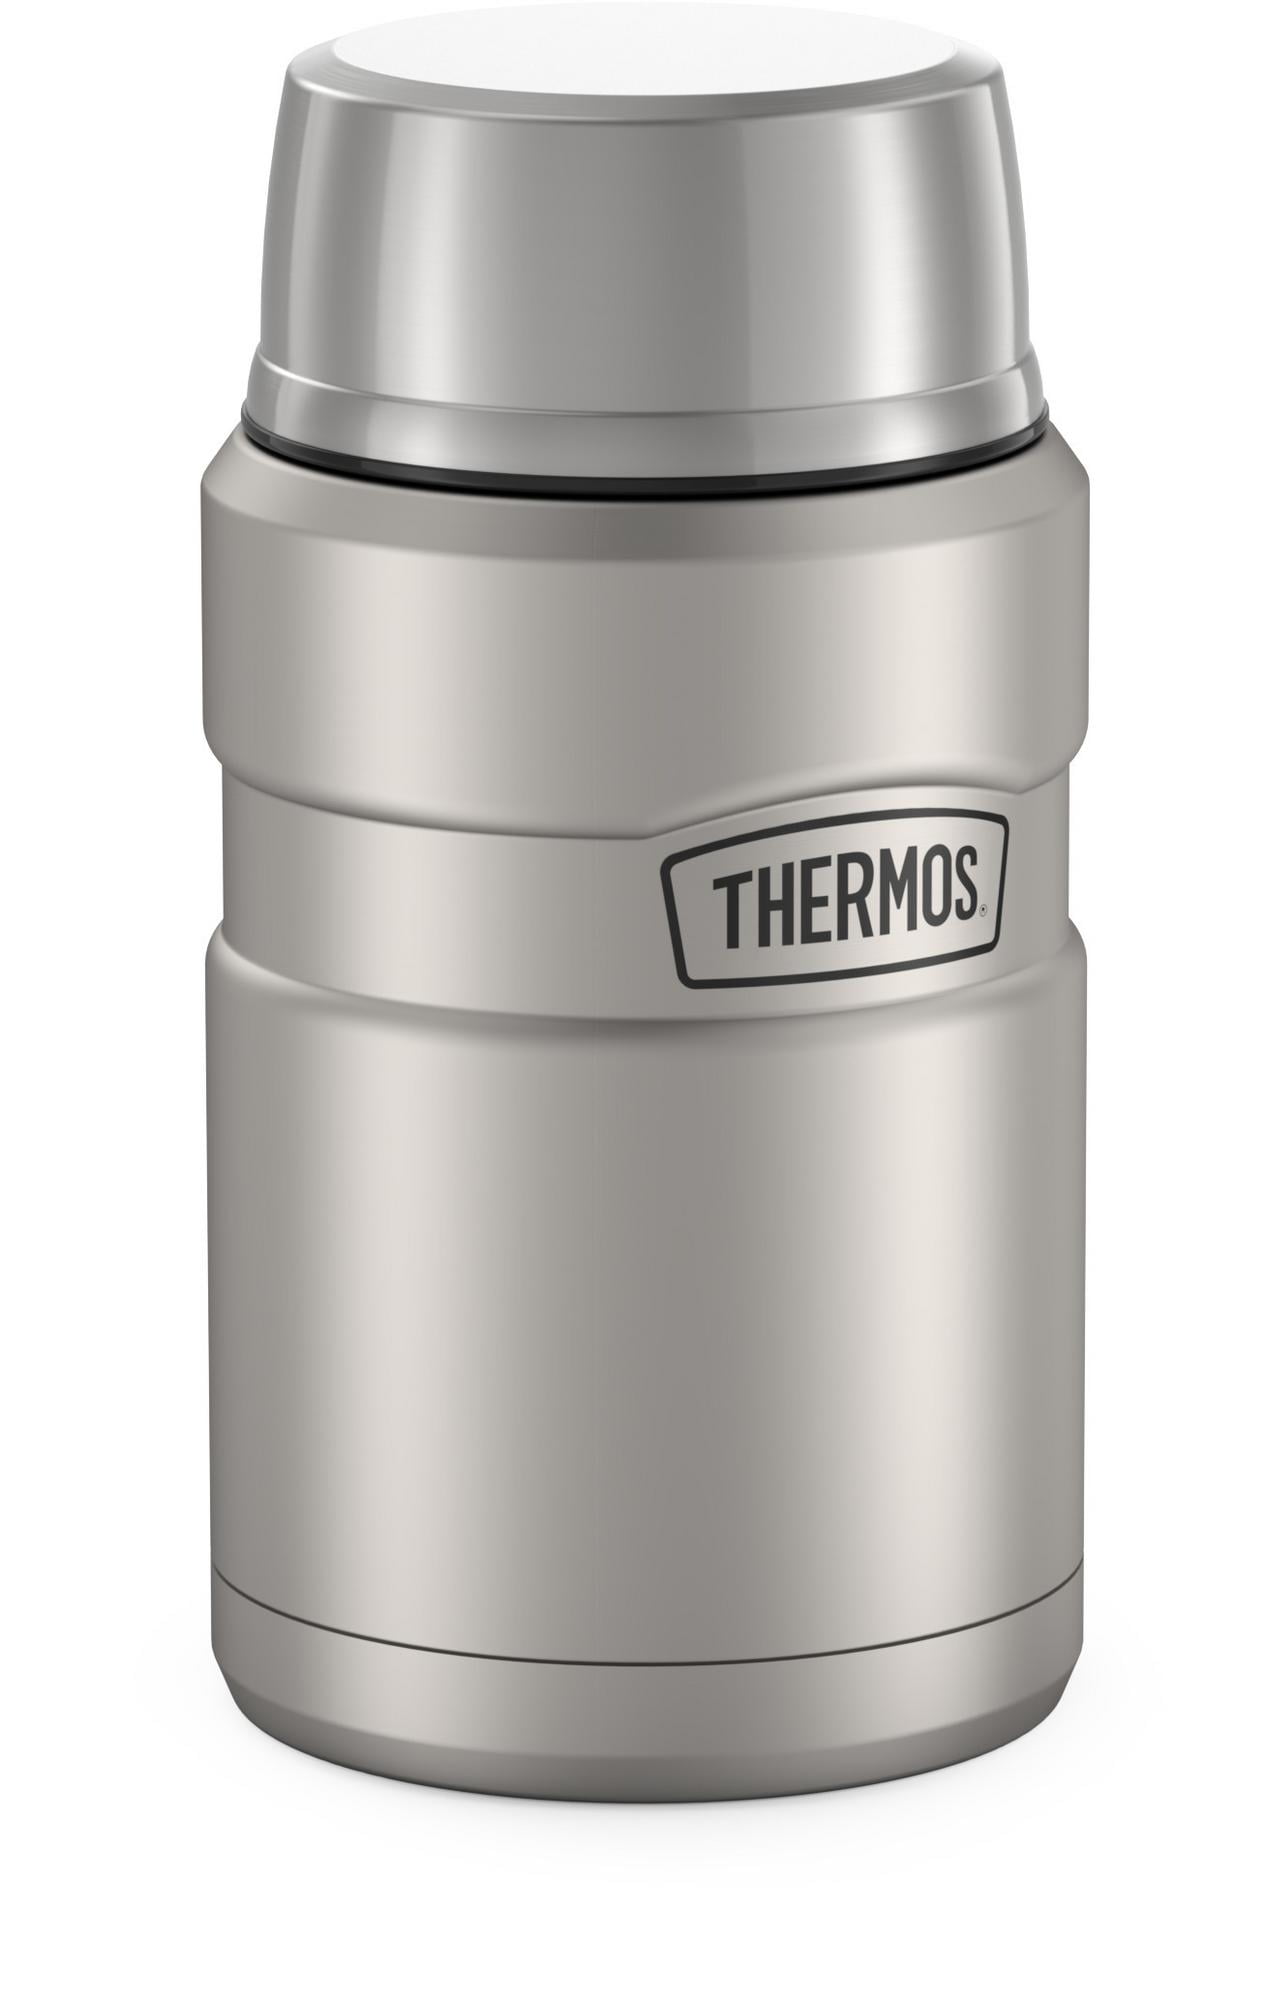  THERMOS Stainless King Vacuum-Insulated Food Jar, 24 Ounce,  Matte Steel : Home & Kitchen